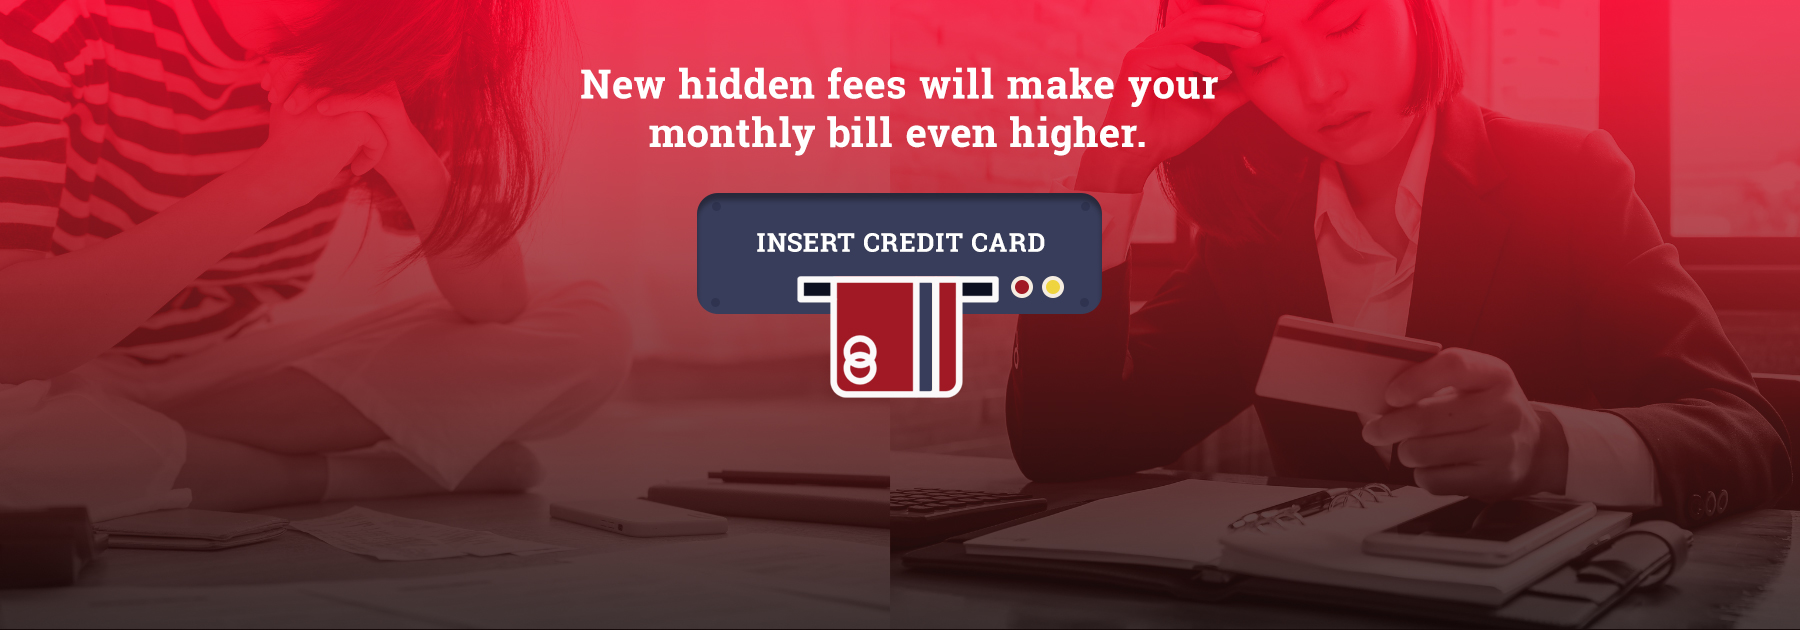 New hidden fees will make your monthly bill even higher